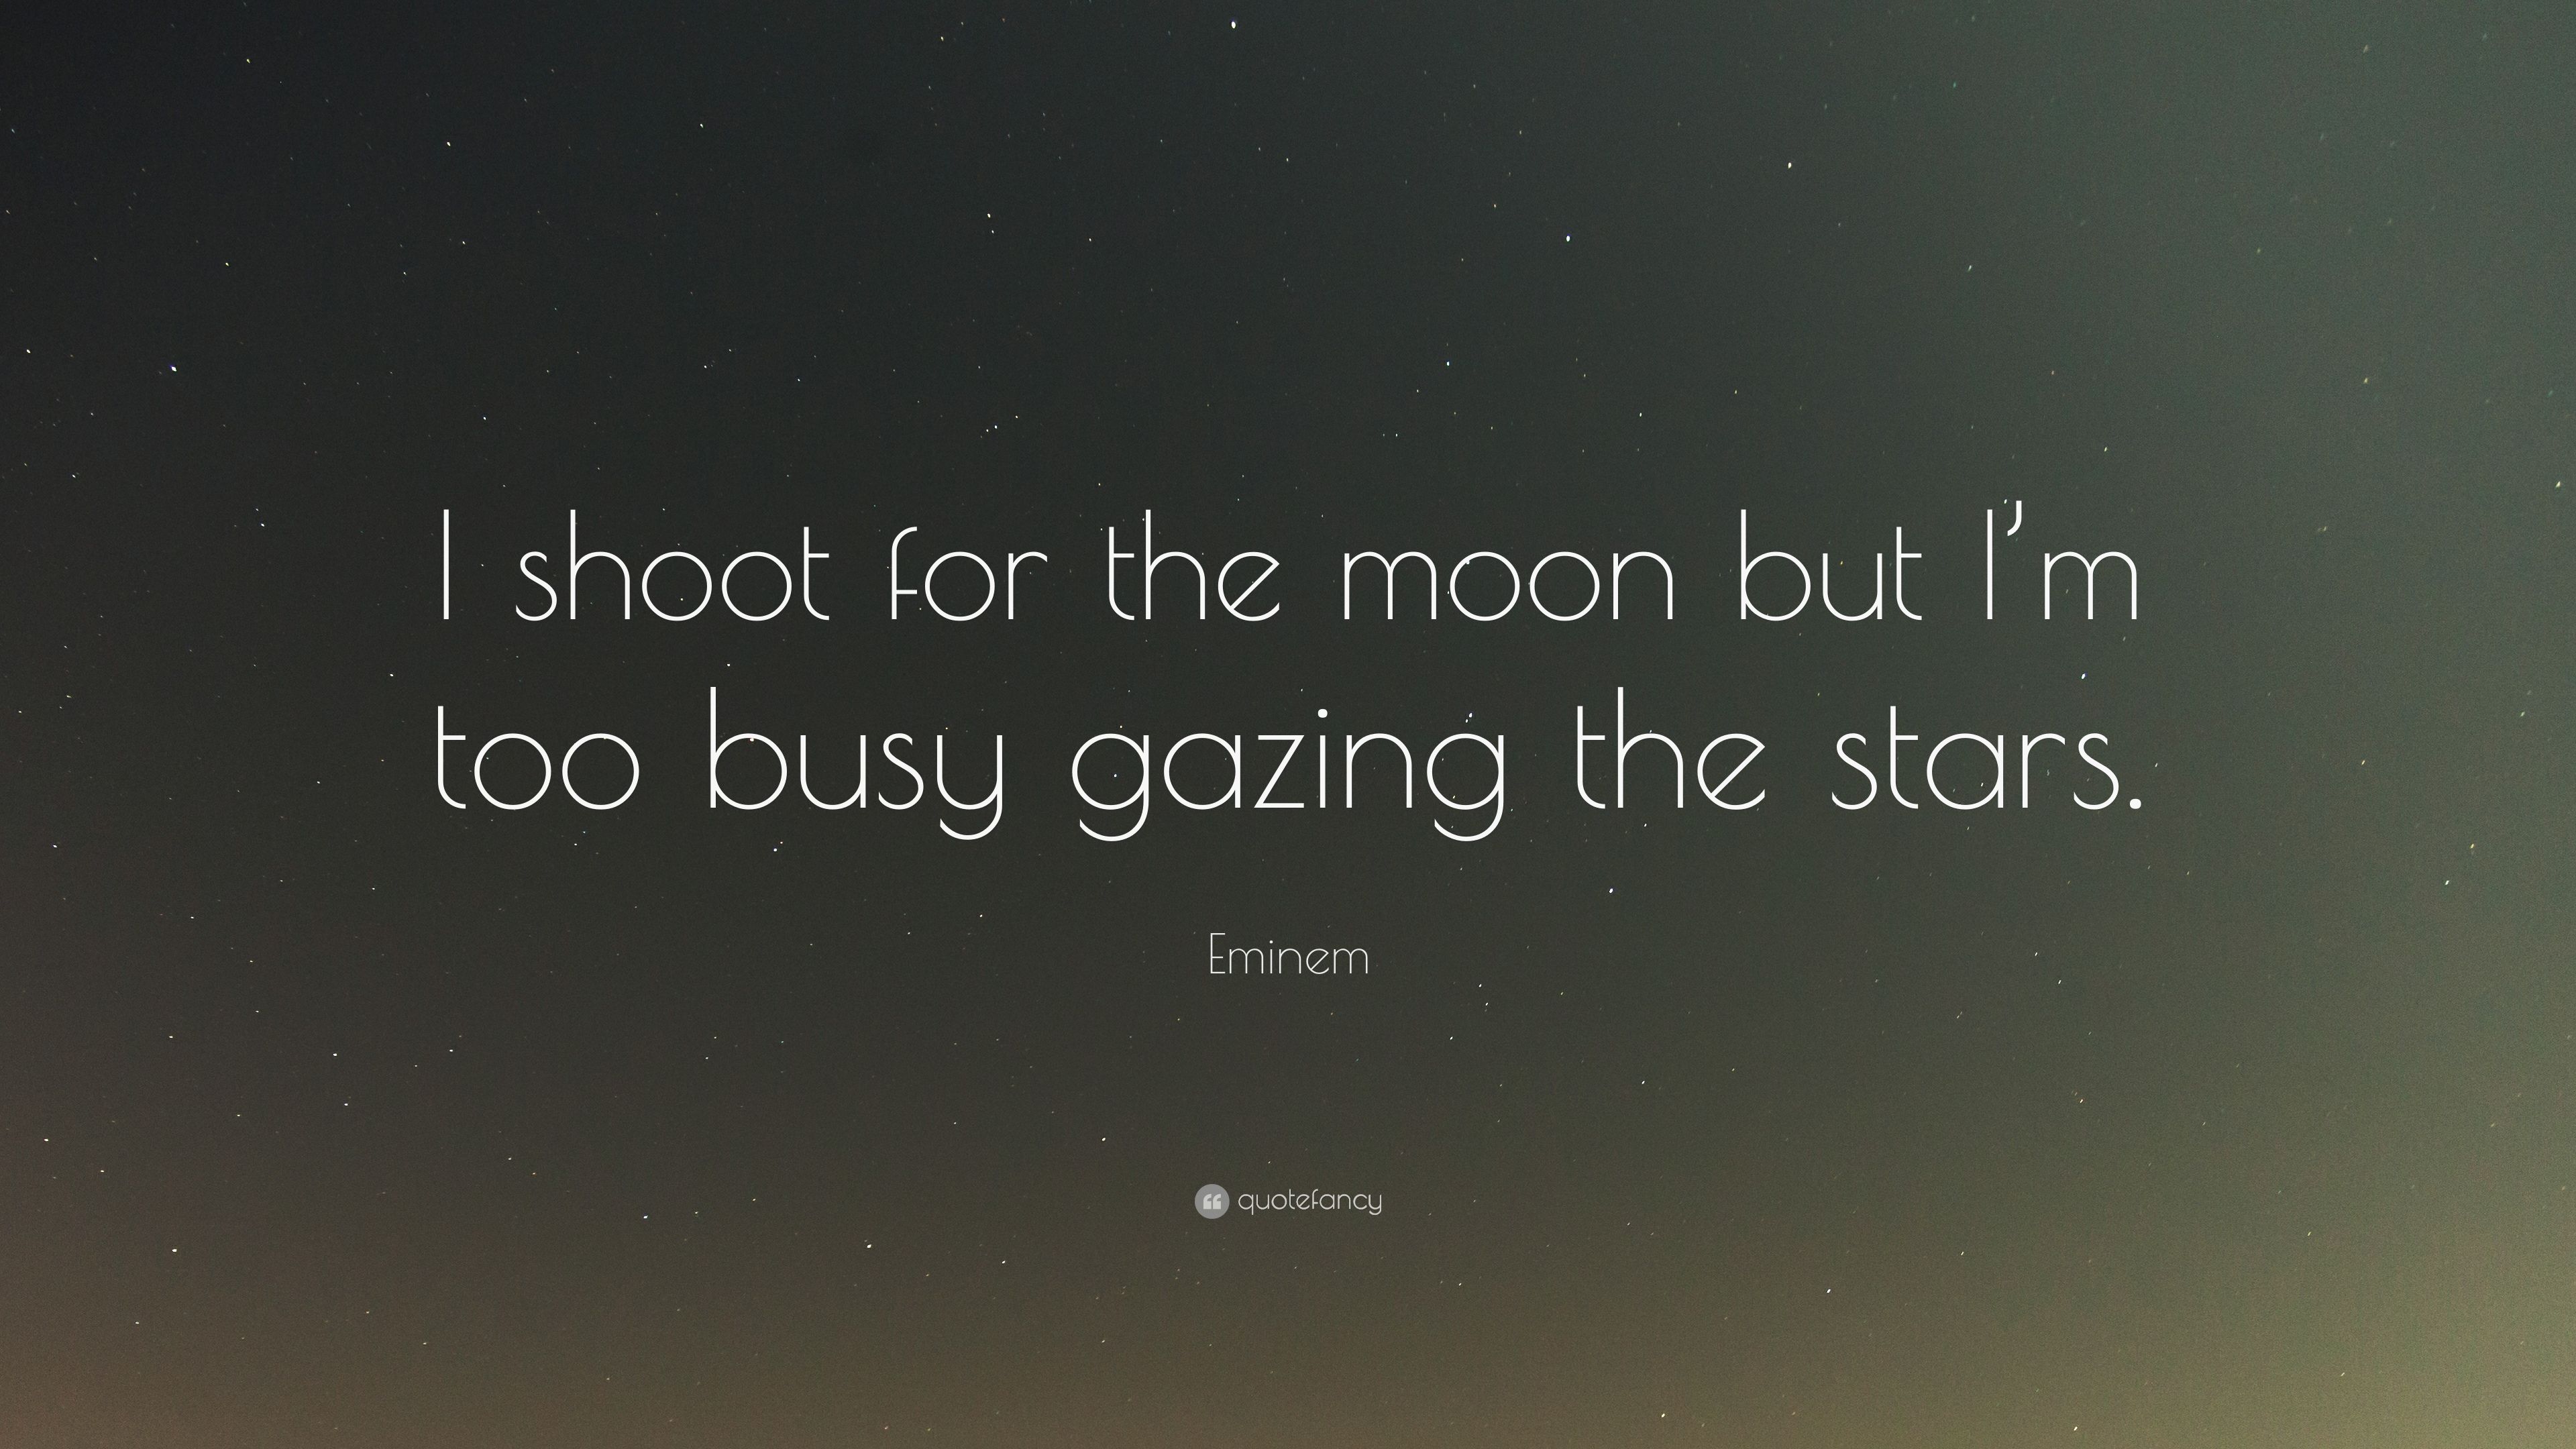 Eminem Quote: “I shoot for the moon but I'm too busy gazing the stars.” (12 wallpaper)